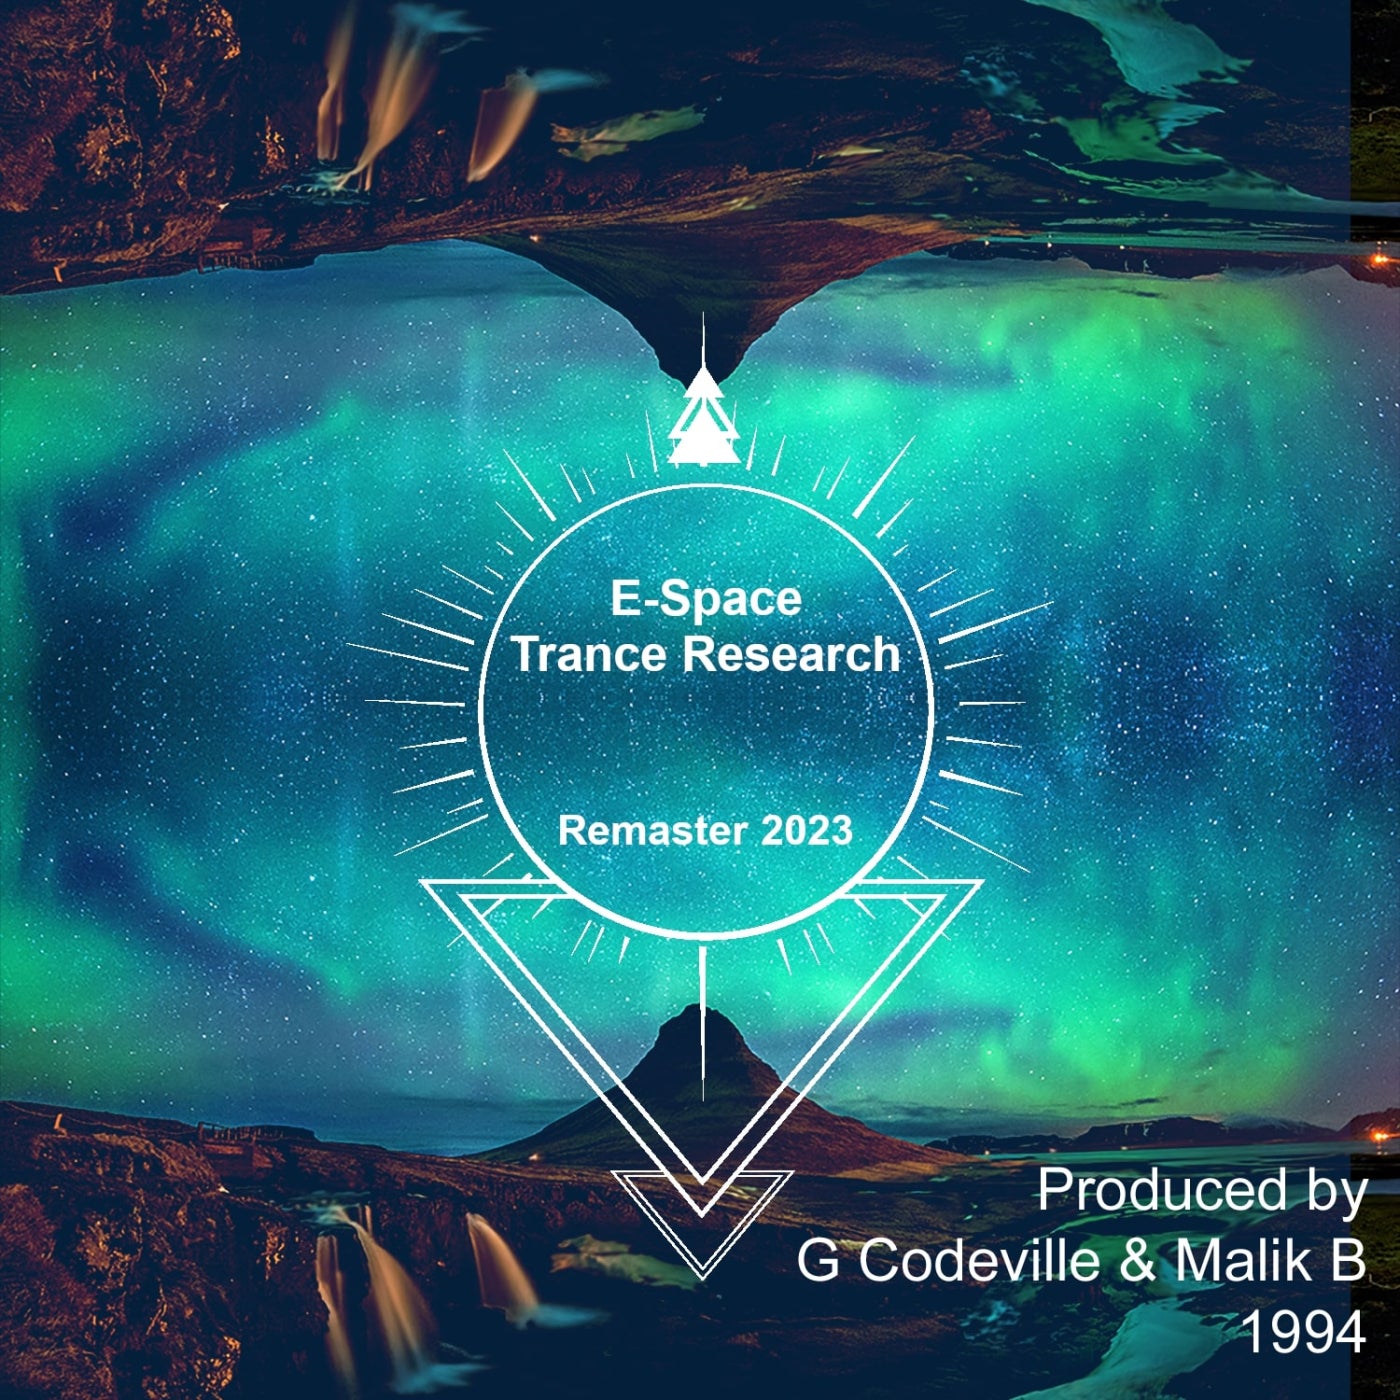 Trance Research